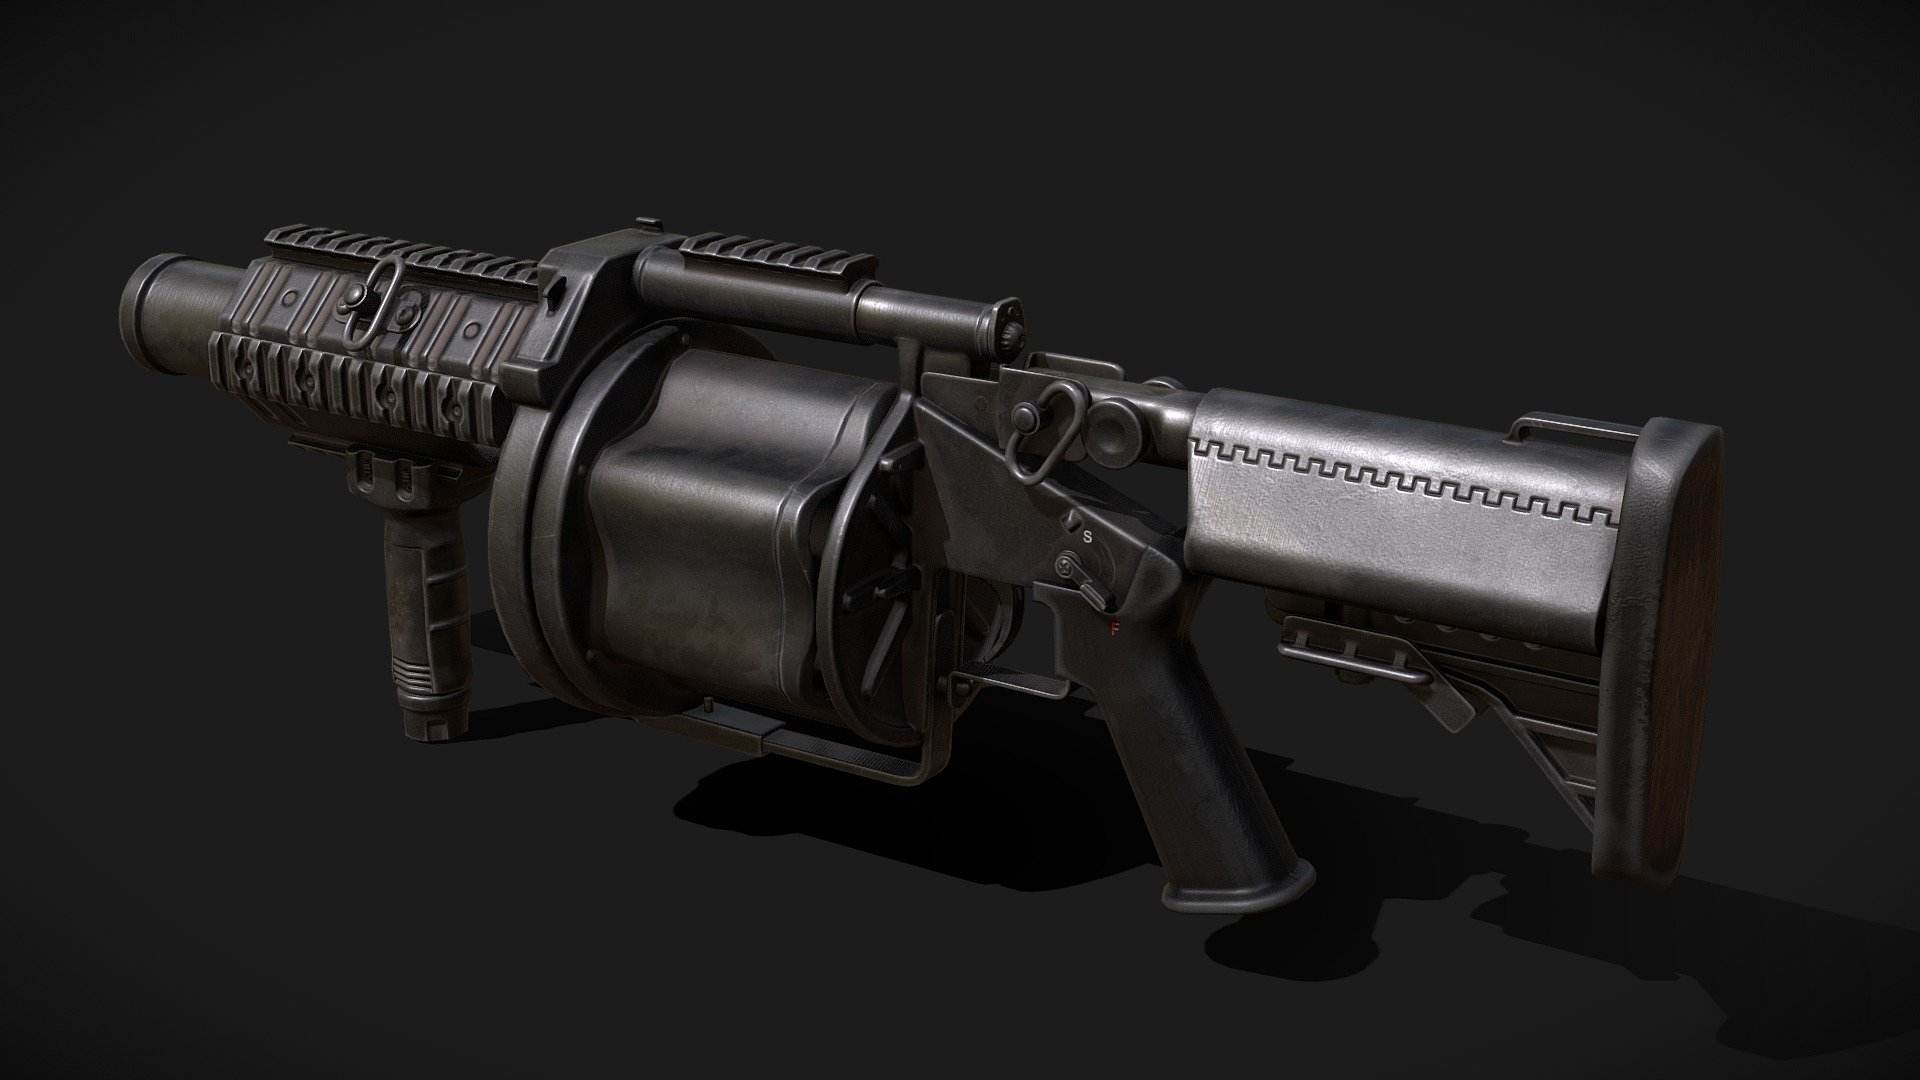 A grenade launcher! Had to push this one out pretty quickly. I really need to up my weapon presentation game.







 - Milkor MLG - Rust - 3D model by ThomasButters 3d model